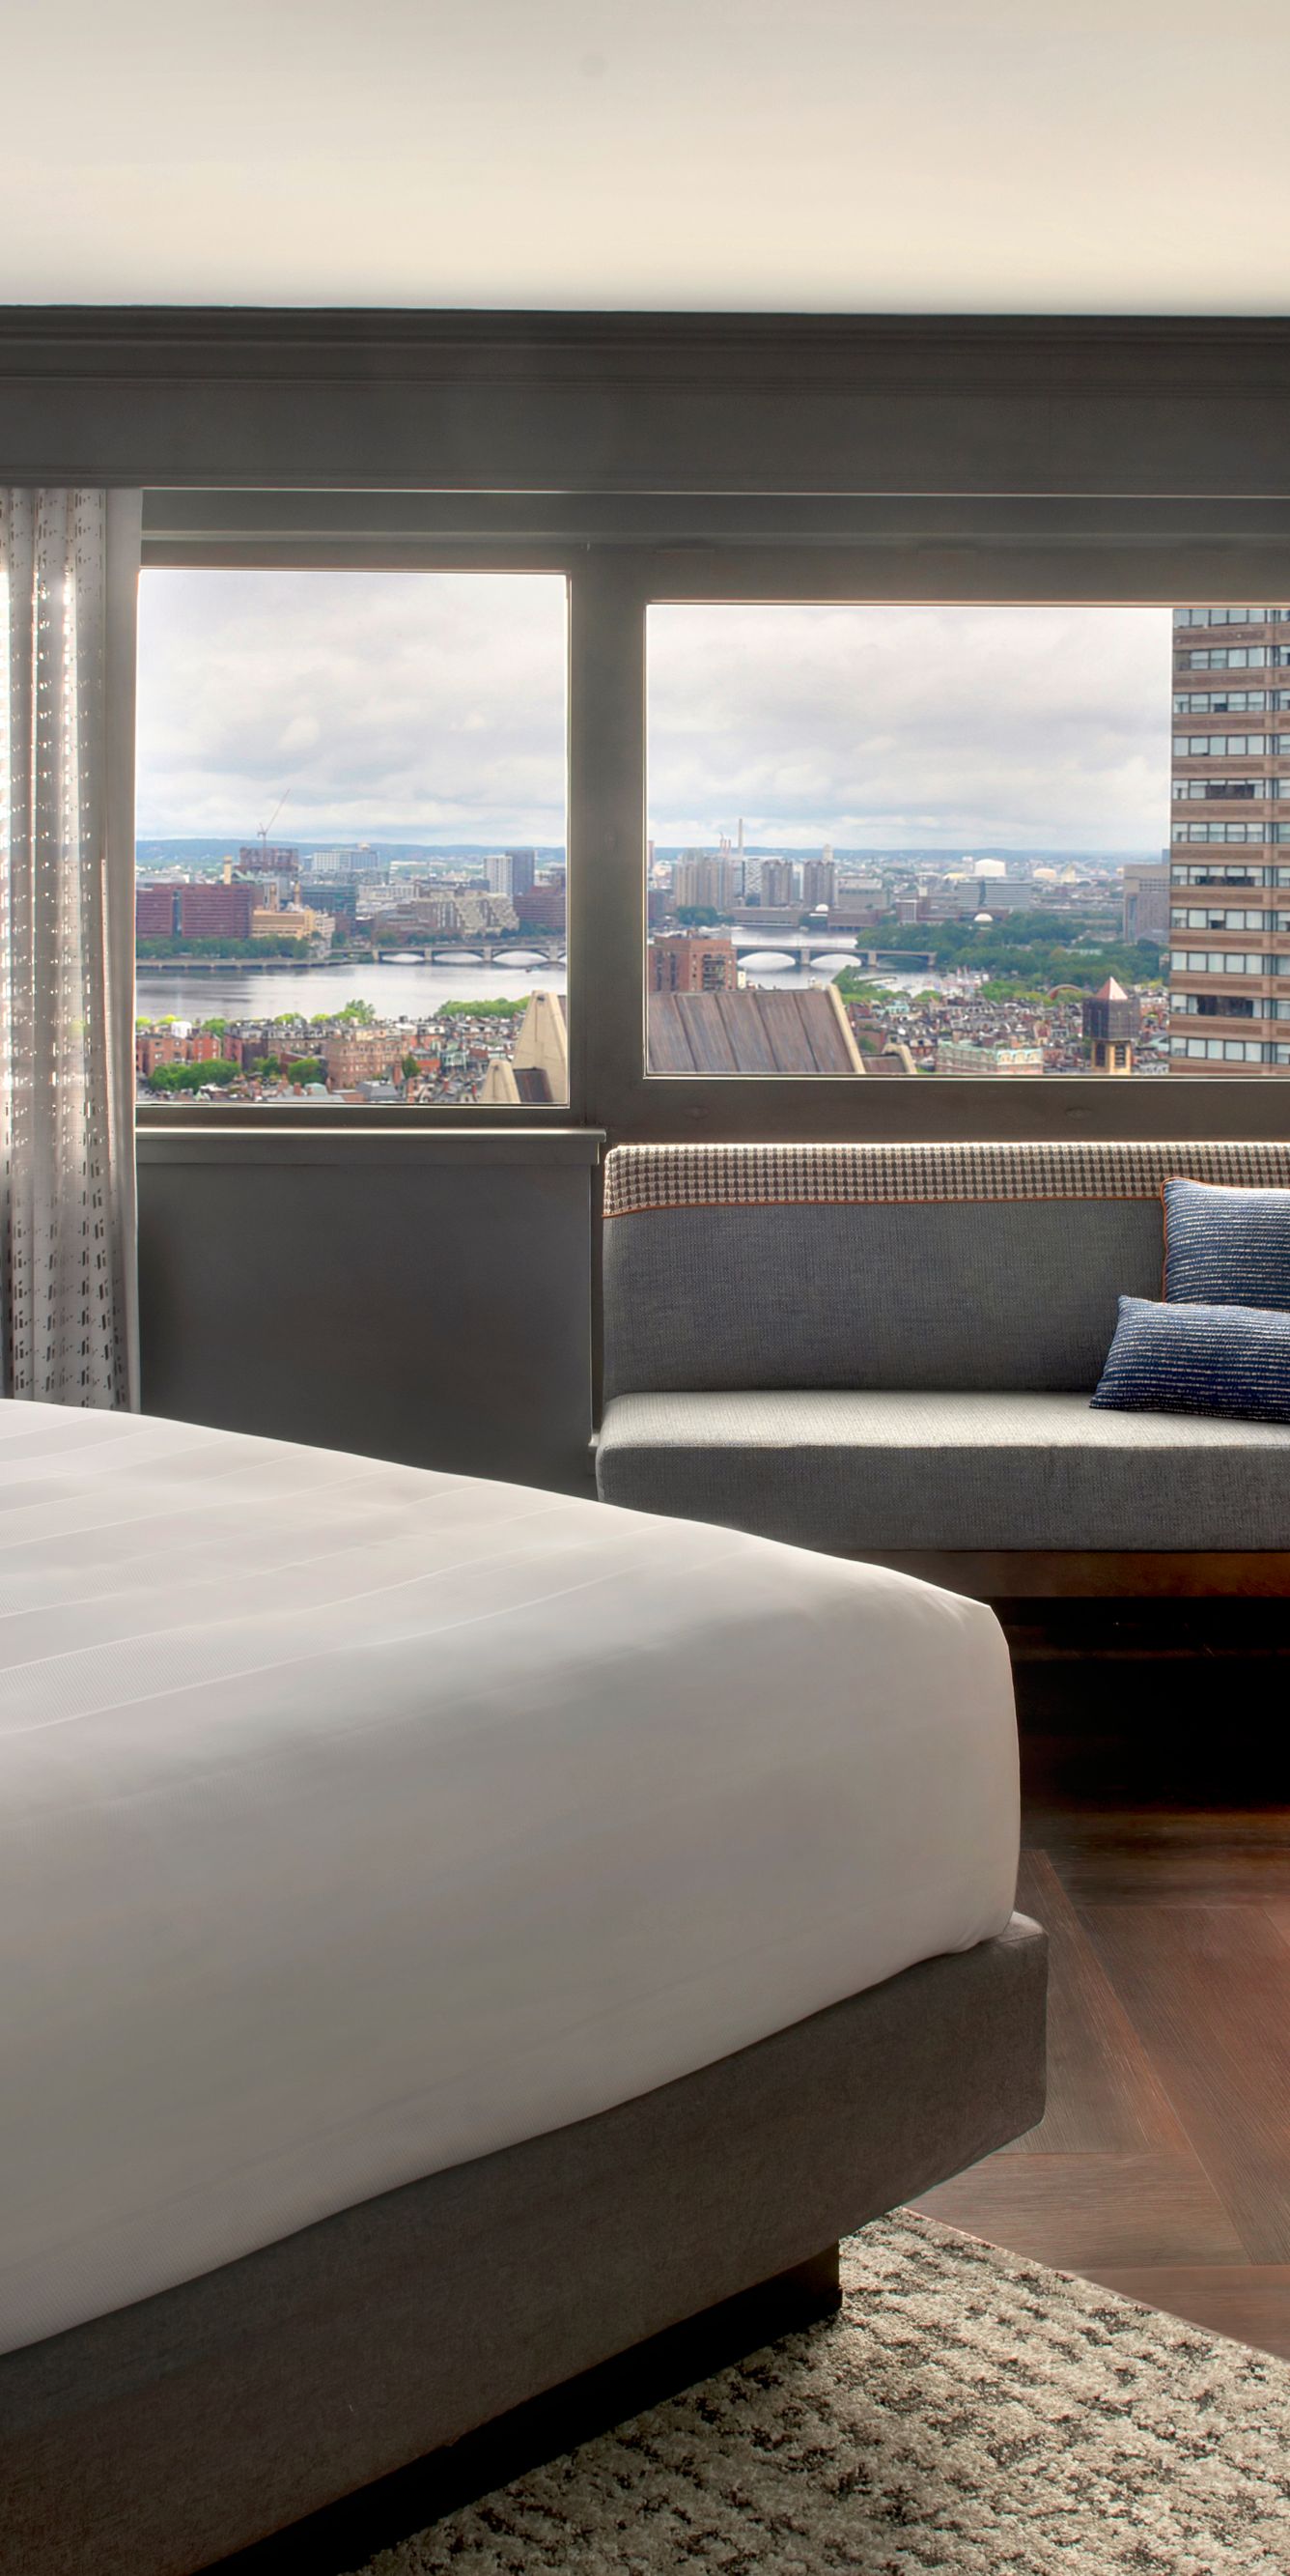 Connected to the mall - Picture of Boston Marriott Copley Place -  Tripadvisor